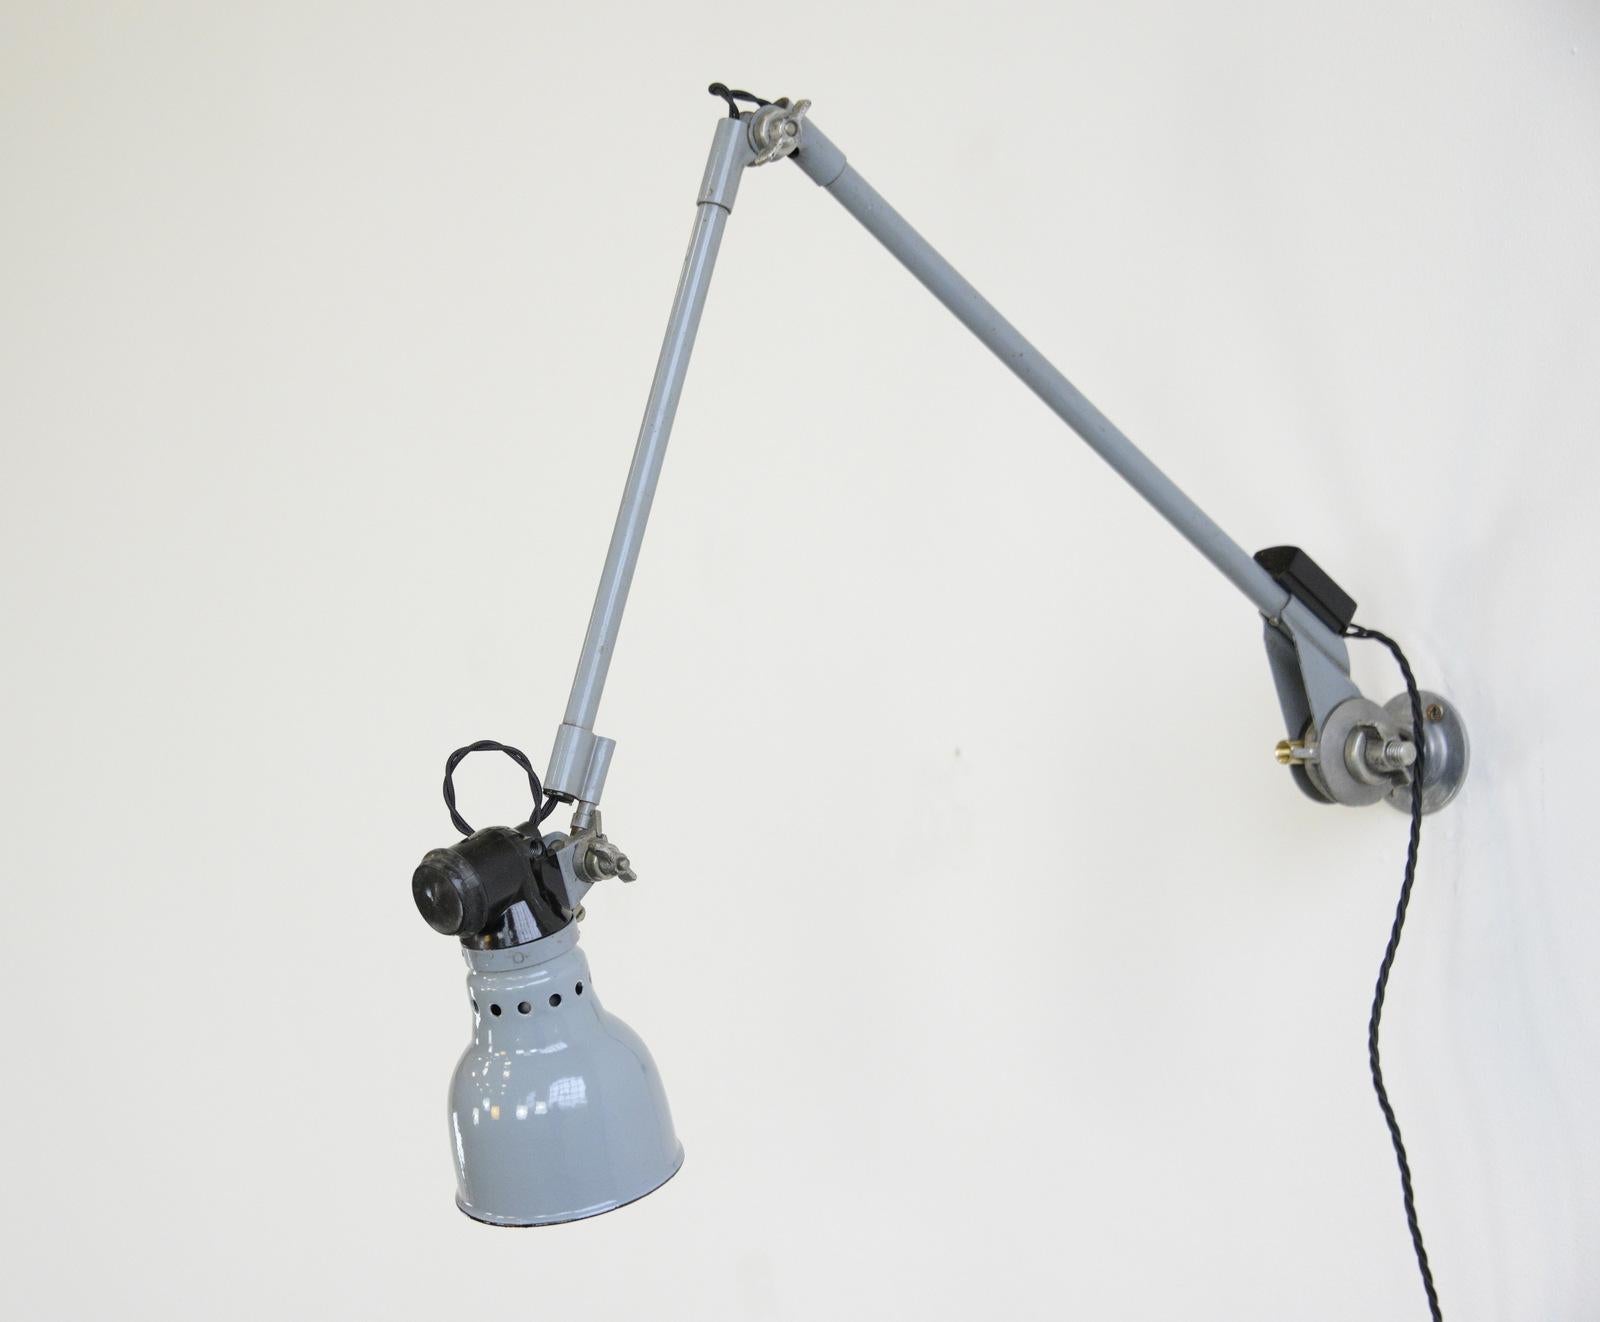 Wall mounted task lamp by Rademacher, circa 1930s

- Vitreous grey enamel shade
- Bakelite switch
- Takes E27 fitting bulbs
- Tubular steel articulated arms
- By Ernst Rademacher
- German, 1930s
- Shade measures 11cm wide 
- Extends up to